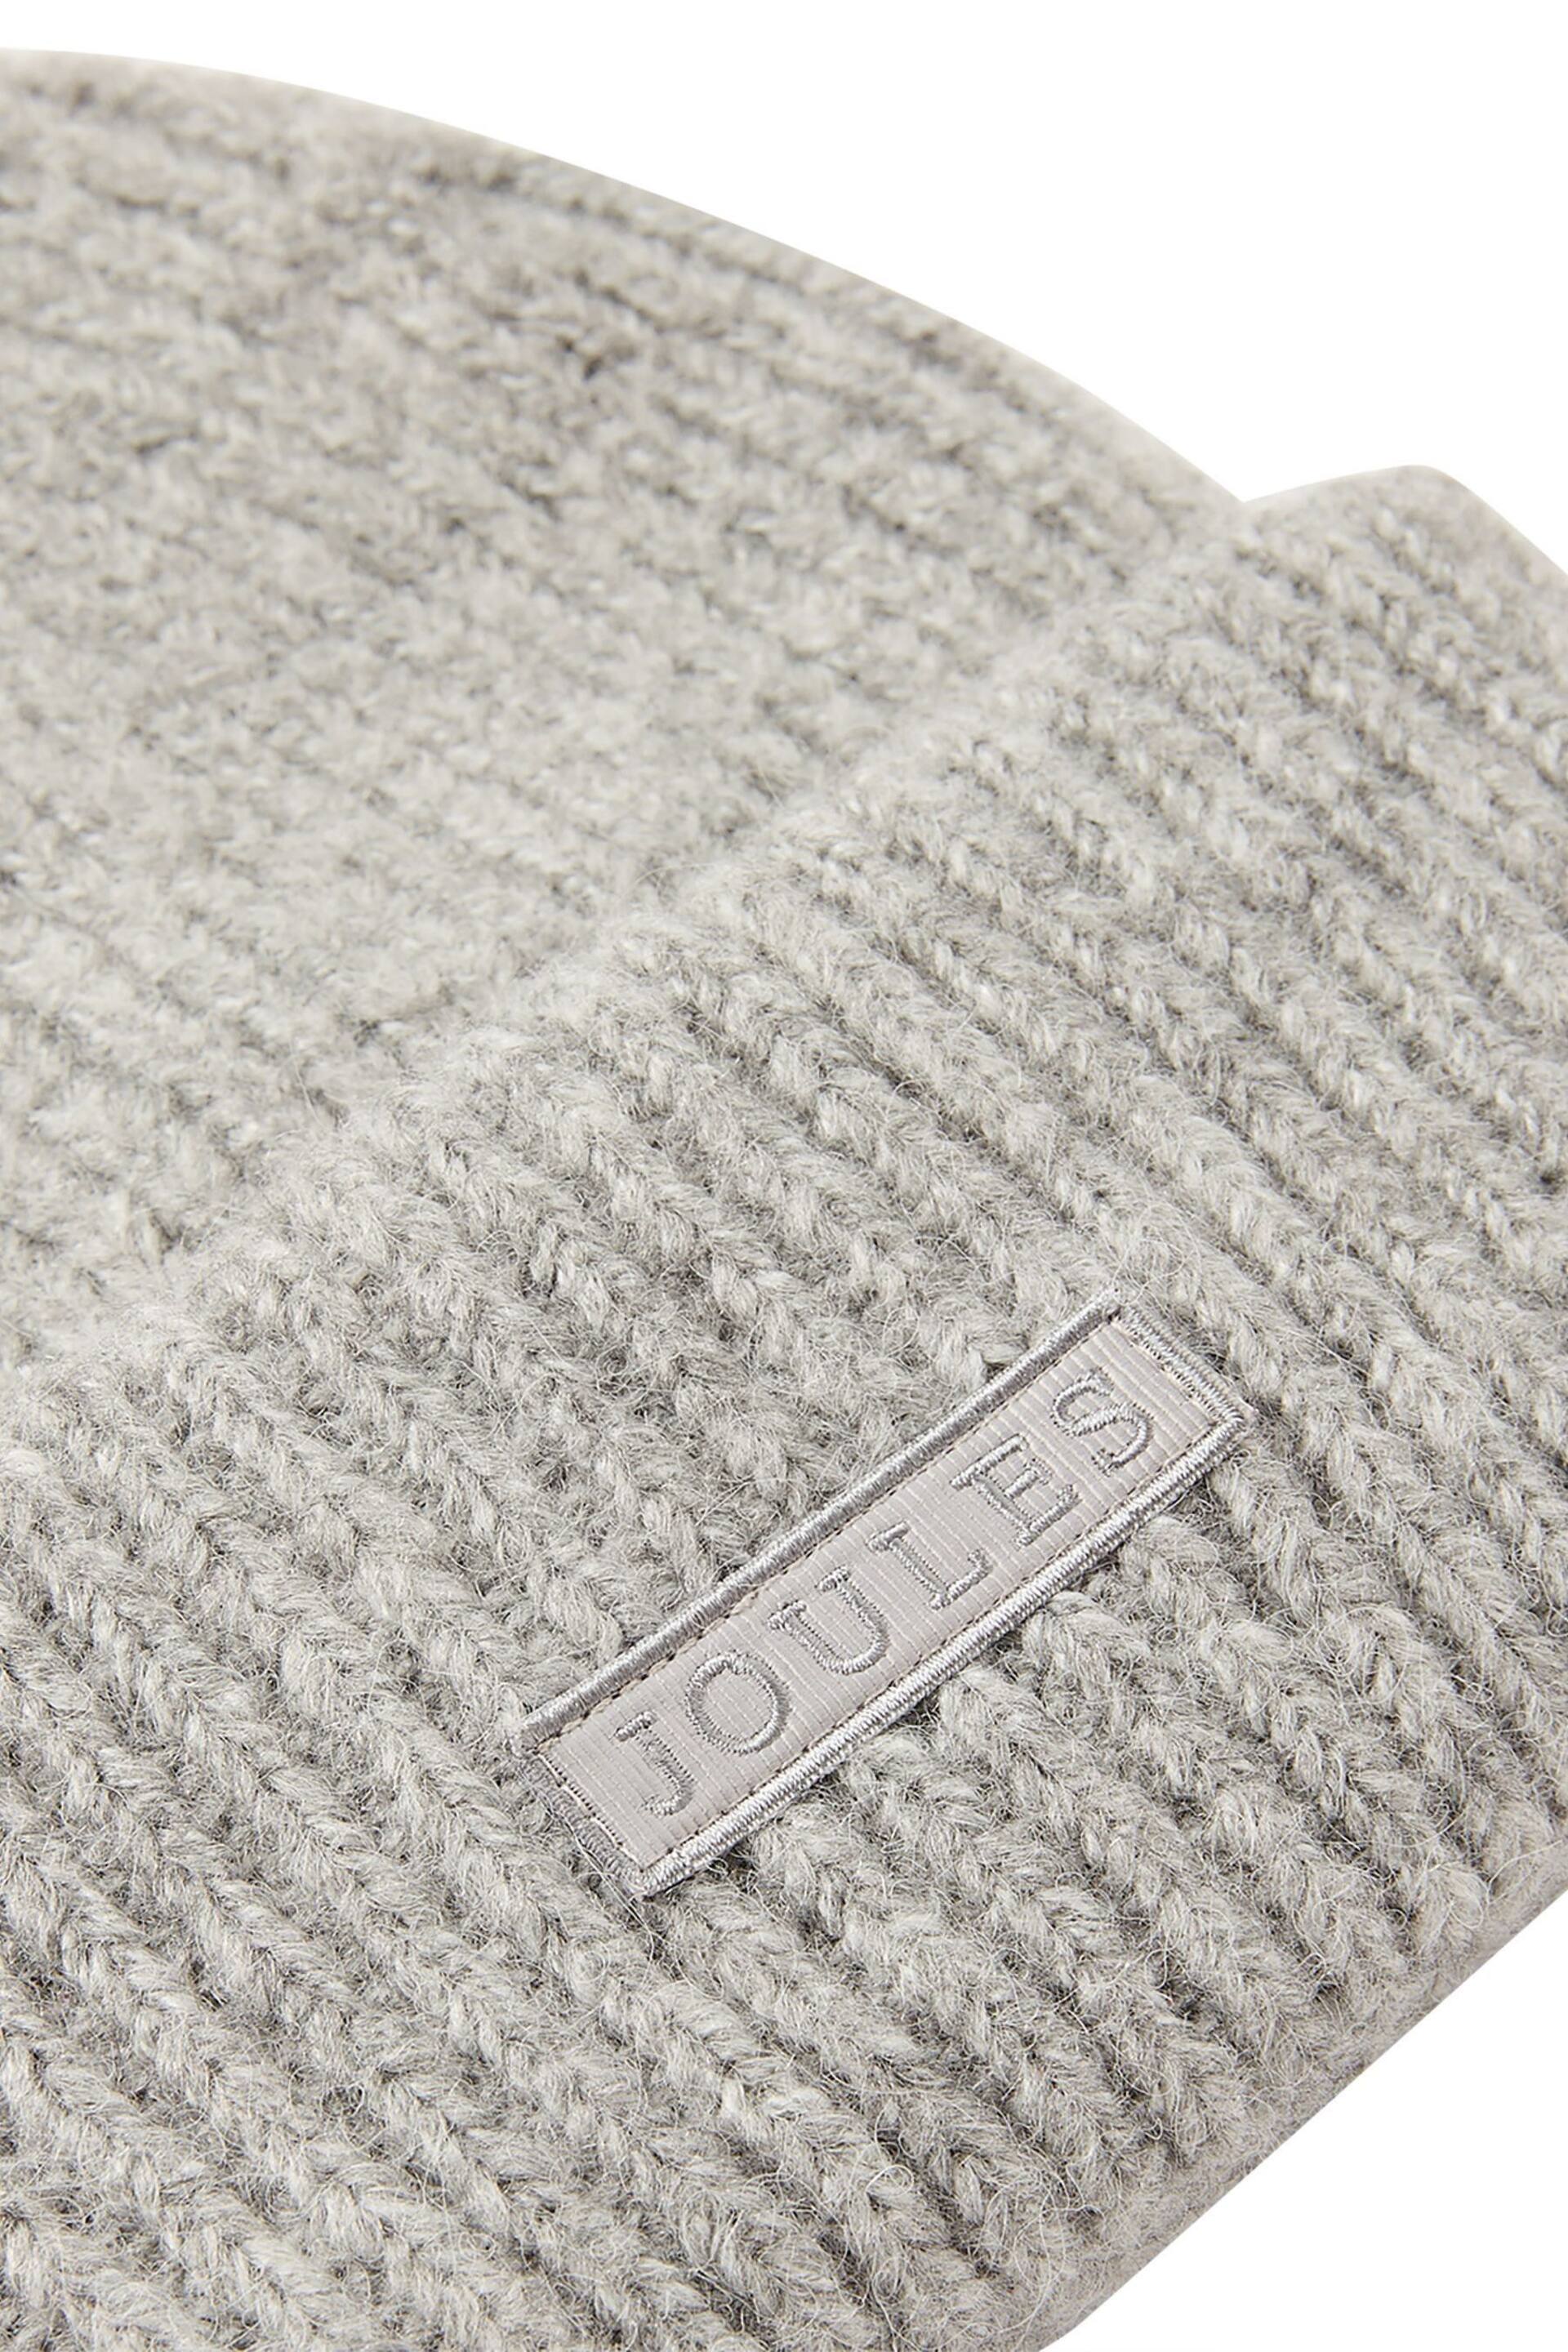 Joules Eloise Grey Marl Oversized Knitted Beanie Hat - Image 5 of 5